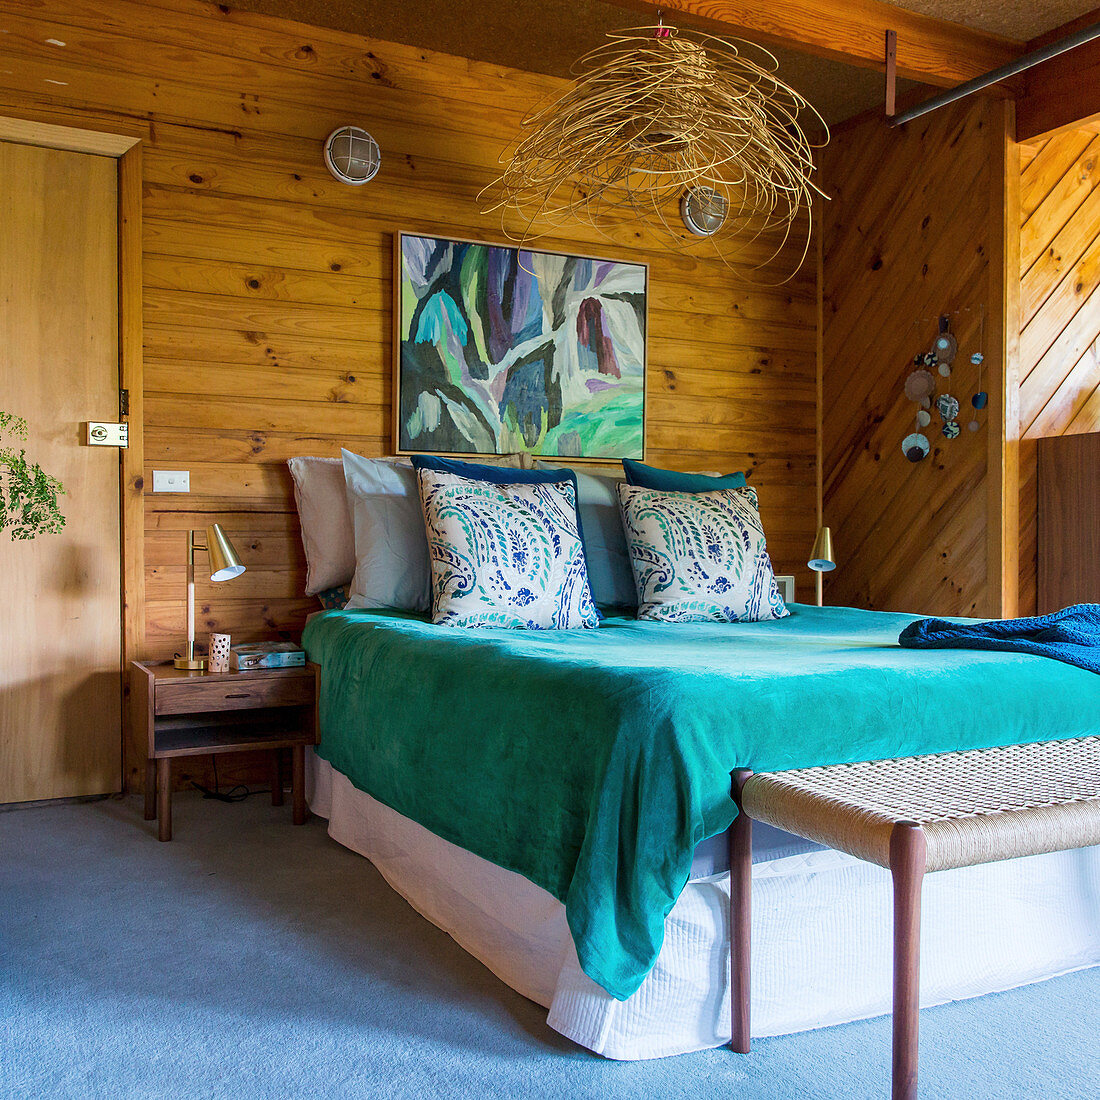 Double bed with turquoise bedspread in the bedroom with wooden paneling